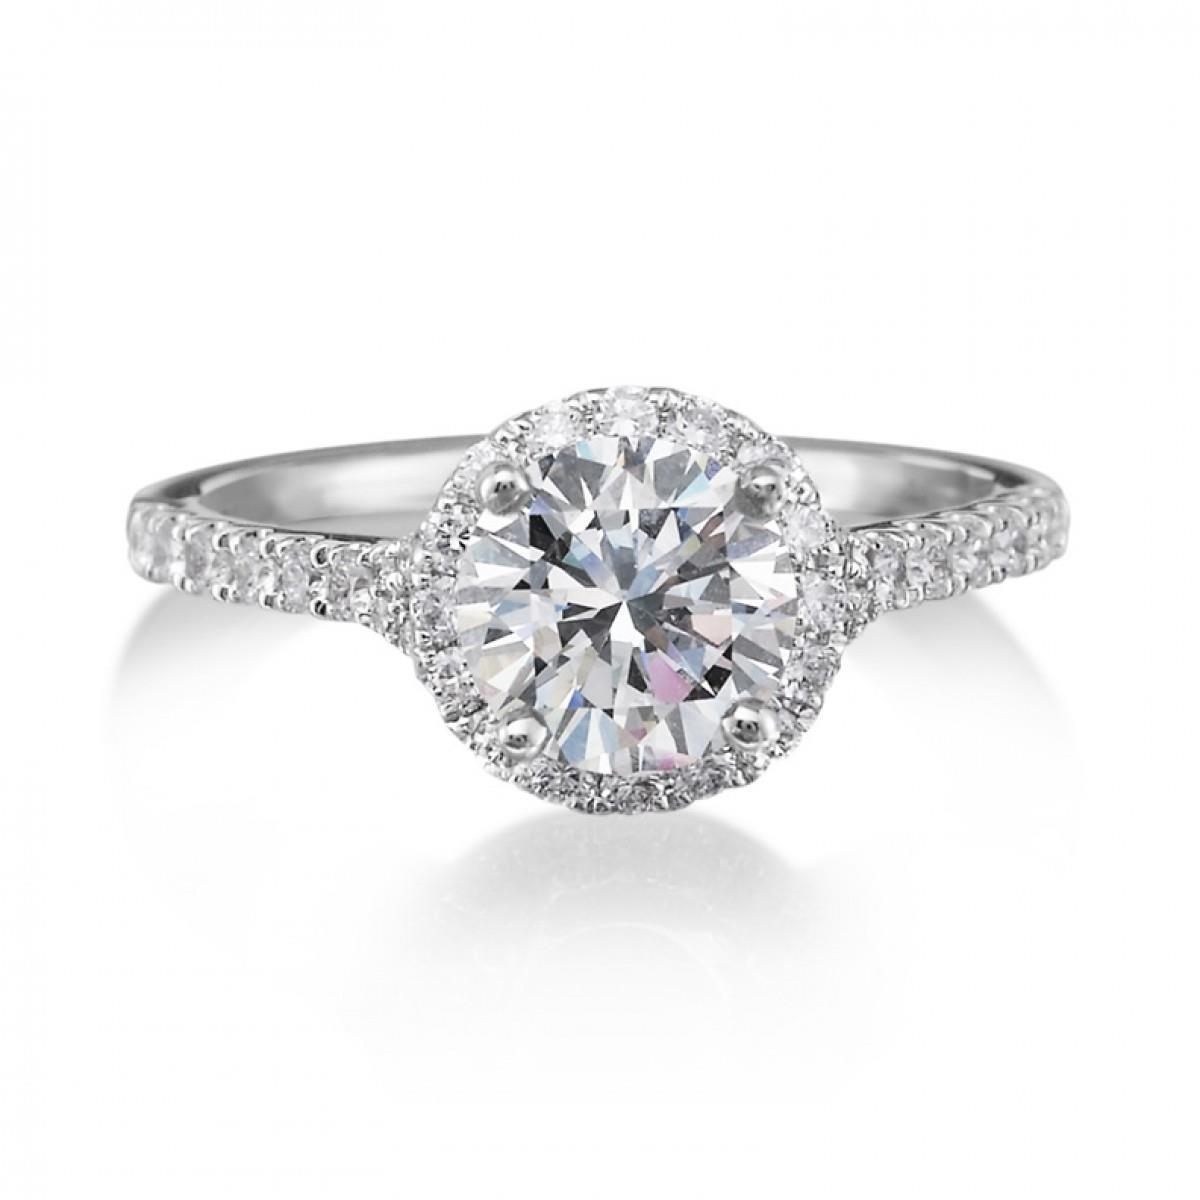 Picture of Harry Chad Enterprises 63852 1.36 CT Halo Diamond Engagement Ring, 14K White Gold - Size 6.5